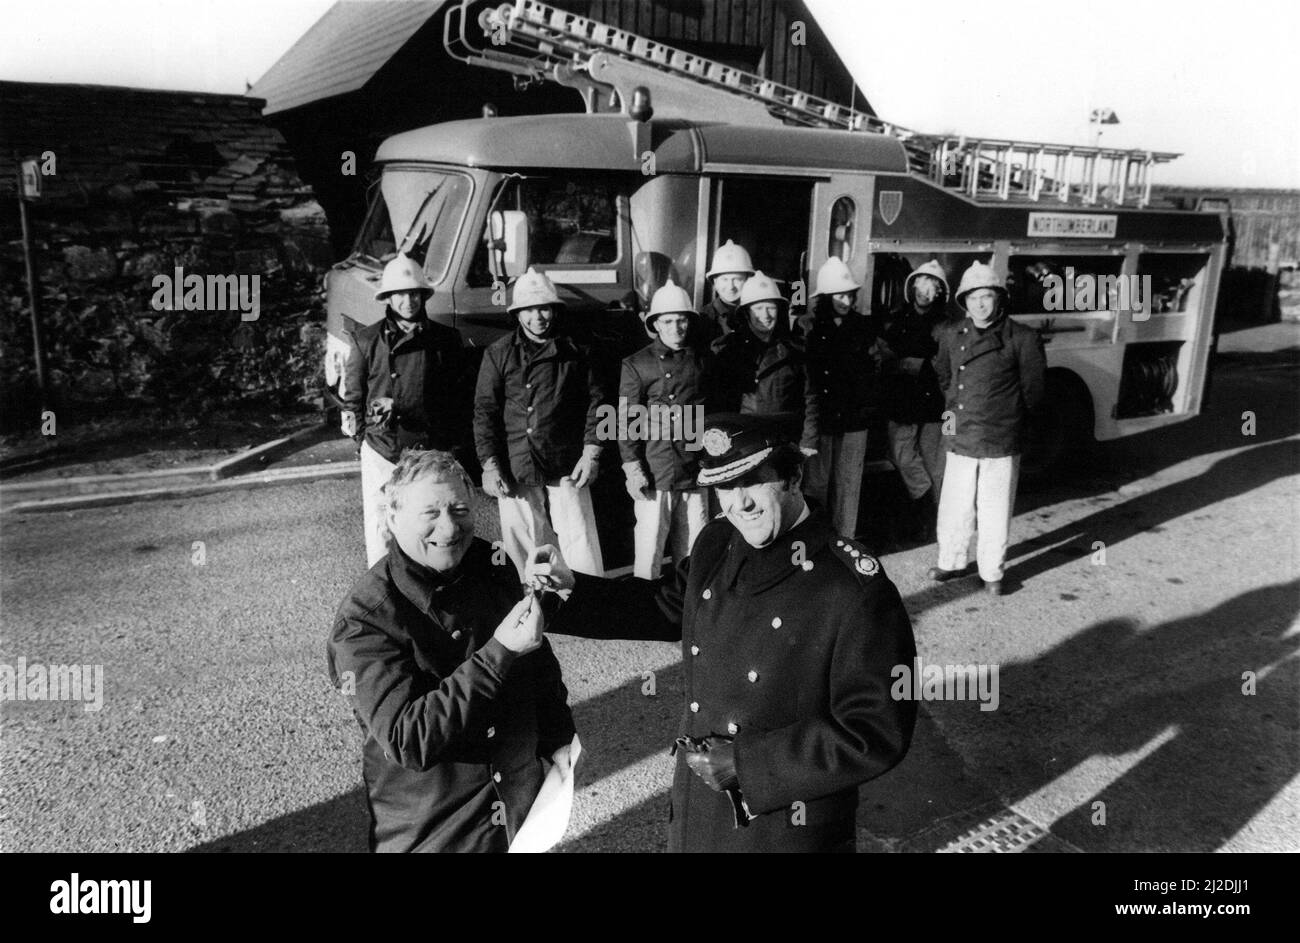 Chief fire officer Dennis Mee hands over the fire engine keys to leading volunteer Ernie Evans.    In 1985, we reported how Holy Island celebrated a landmark in its history with the arrival of its first fire engine.  For Mr Ernie Evans, the islands elected volunteer fire chief, the arrival was the end of several years of waiting.  It means we can at least set about controlling any fires now. And, as well, we have something to practice with and become more efficient, said 64-year-old Mr Evans.  The Holy Island fire engine had been in service at Berwick Fire Station before being taken to the Fir Stock Photo